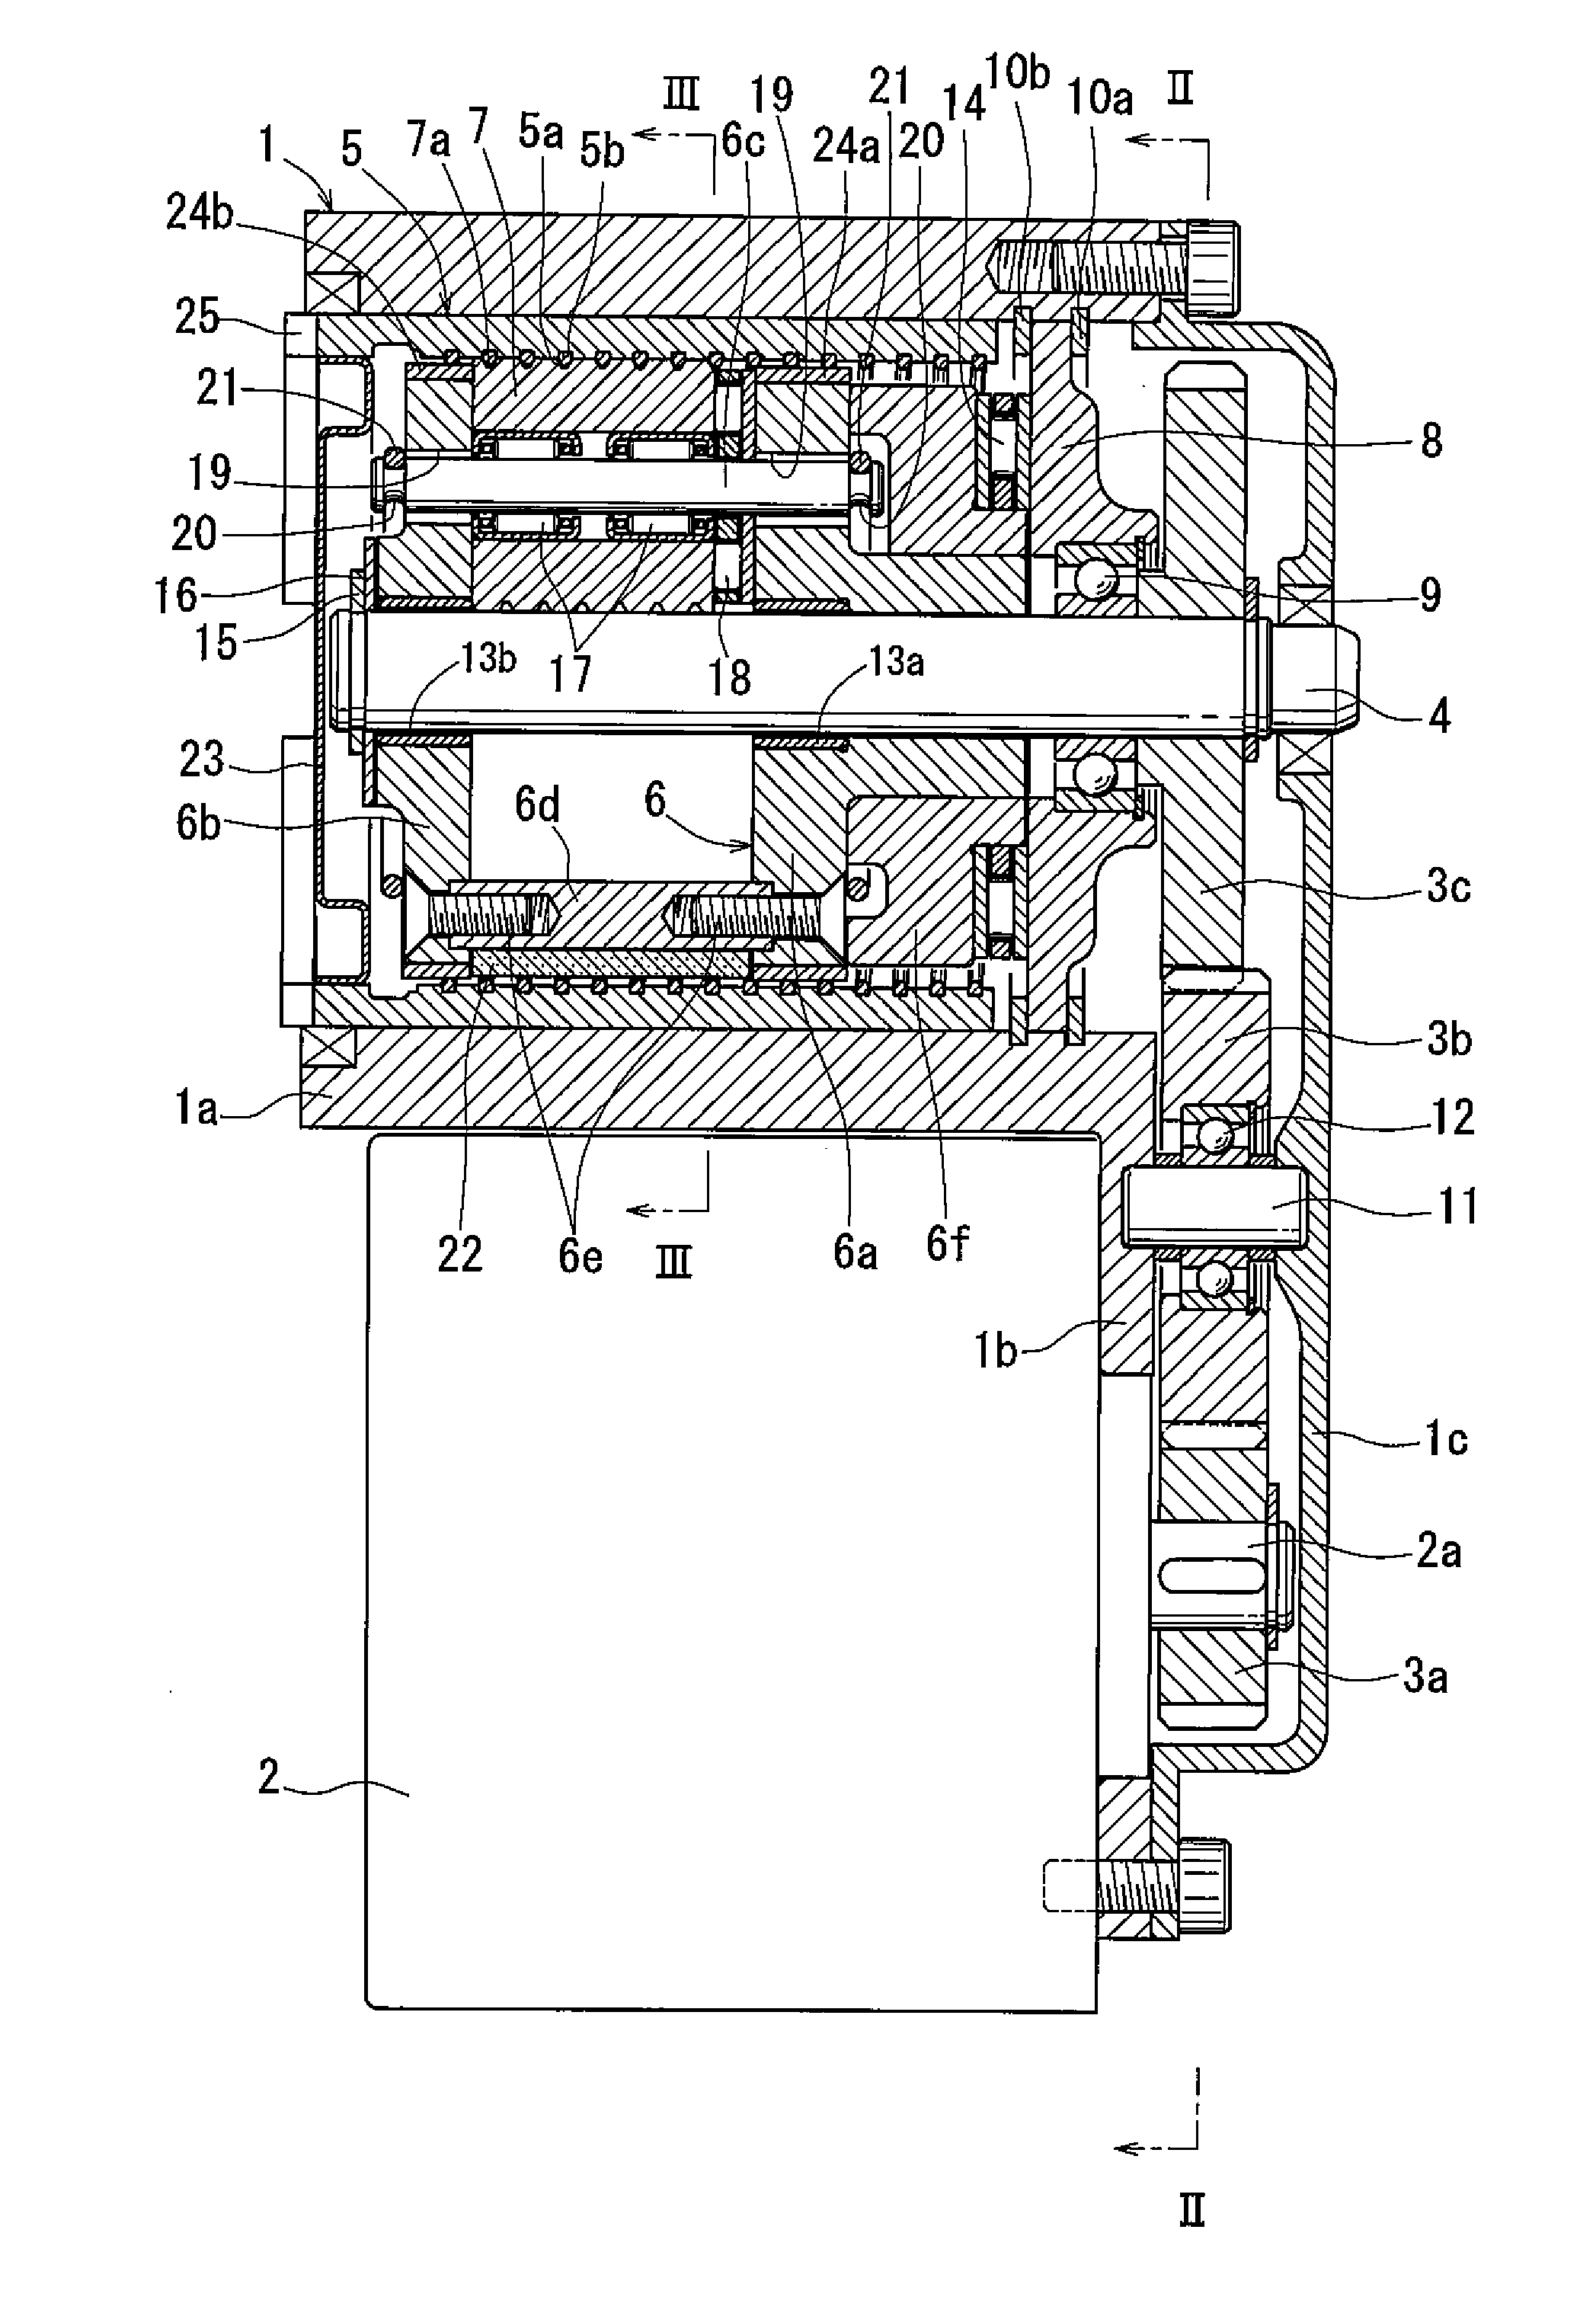 Electric linear motion actuator and electric brake system